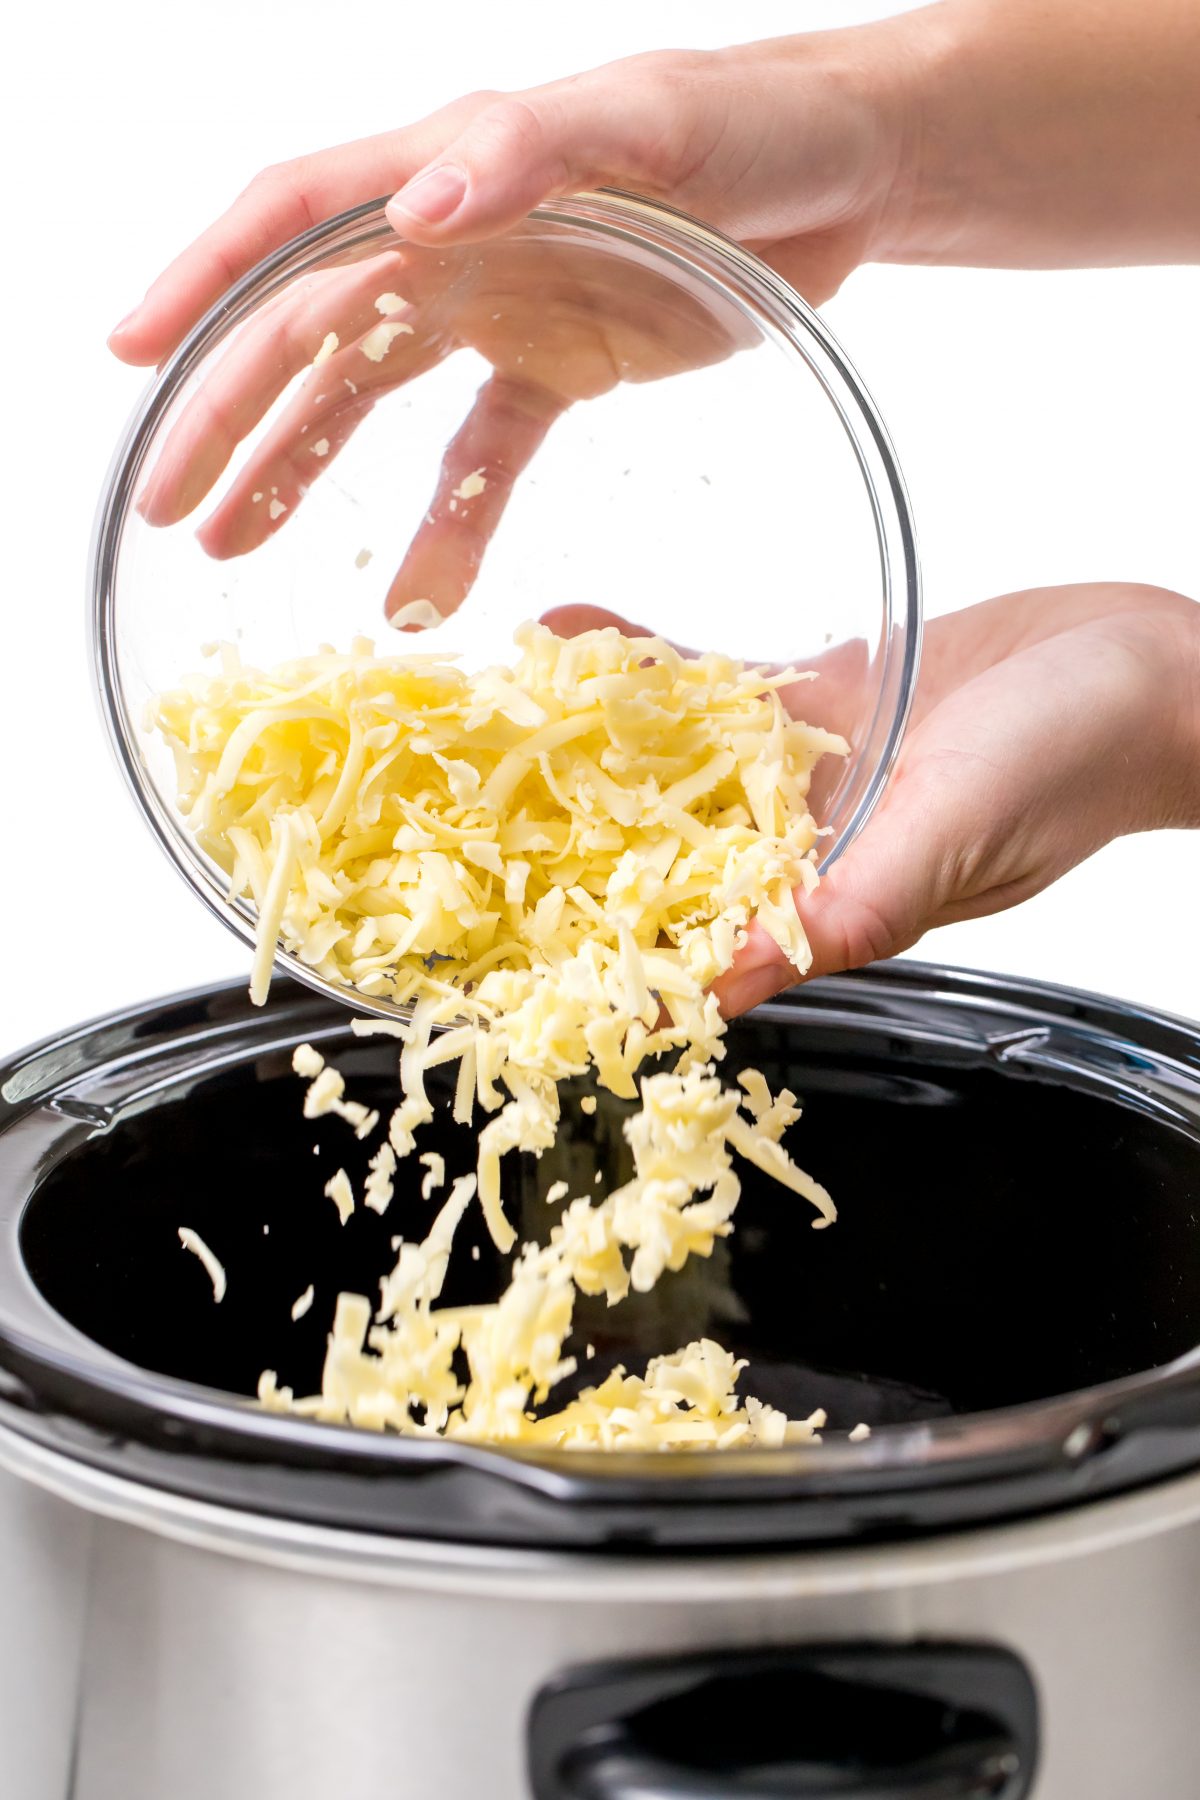 Pour cheese into slow-cooker